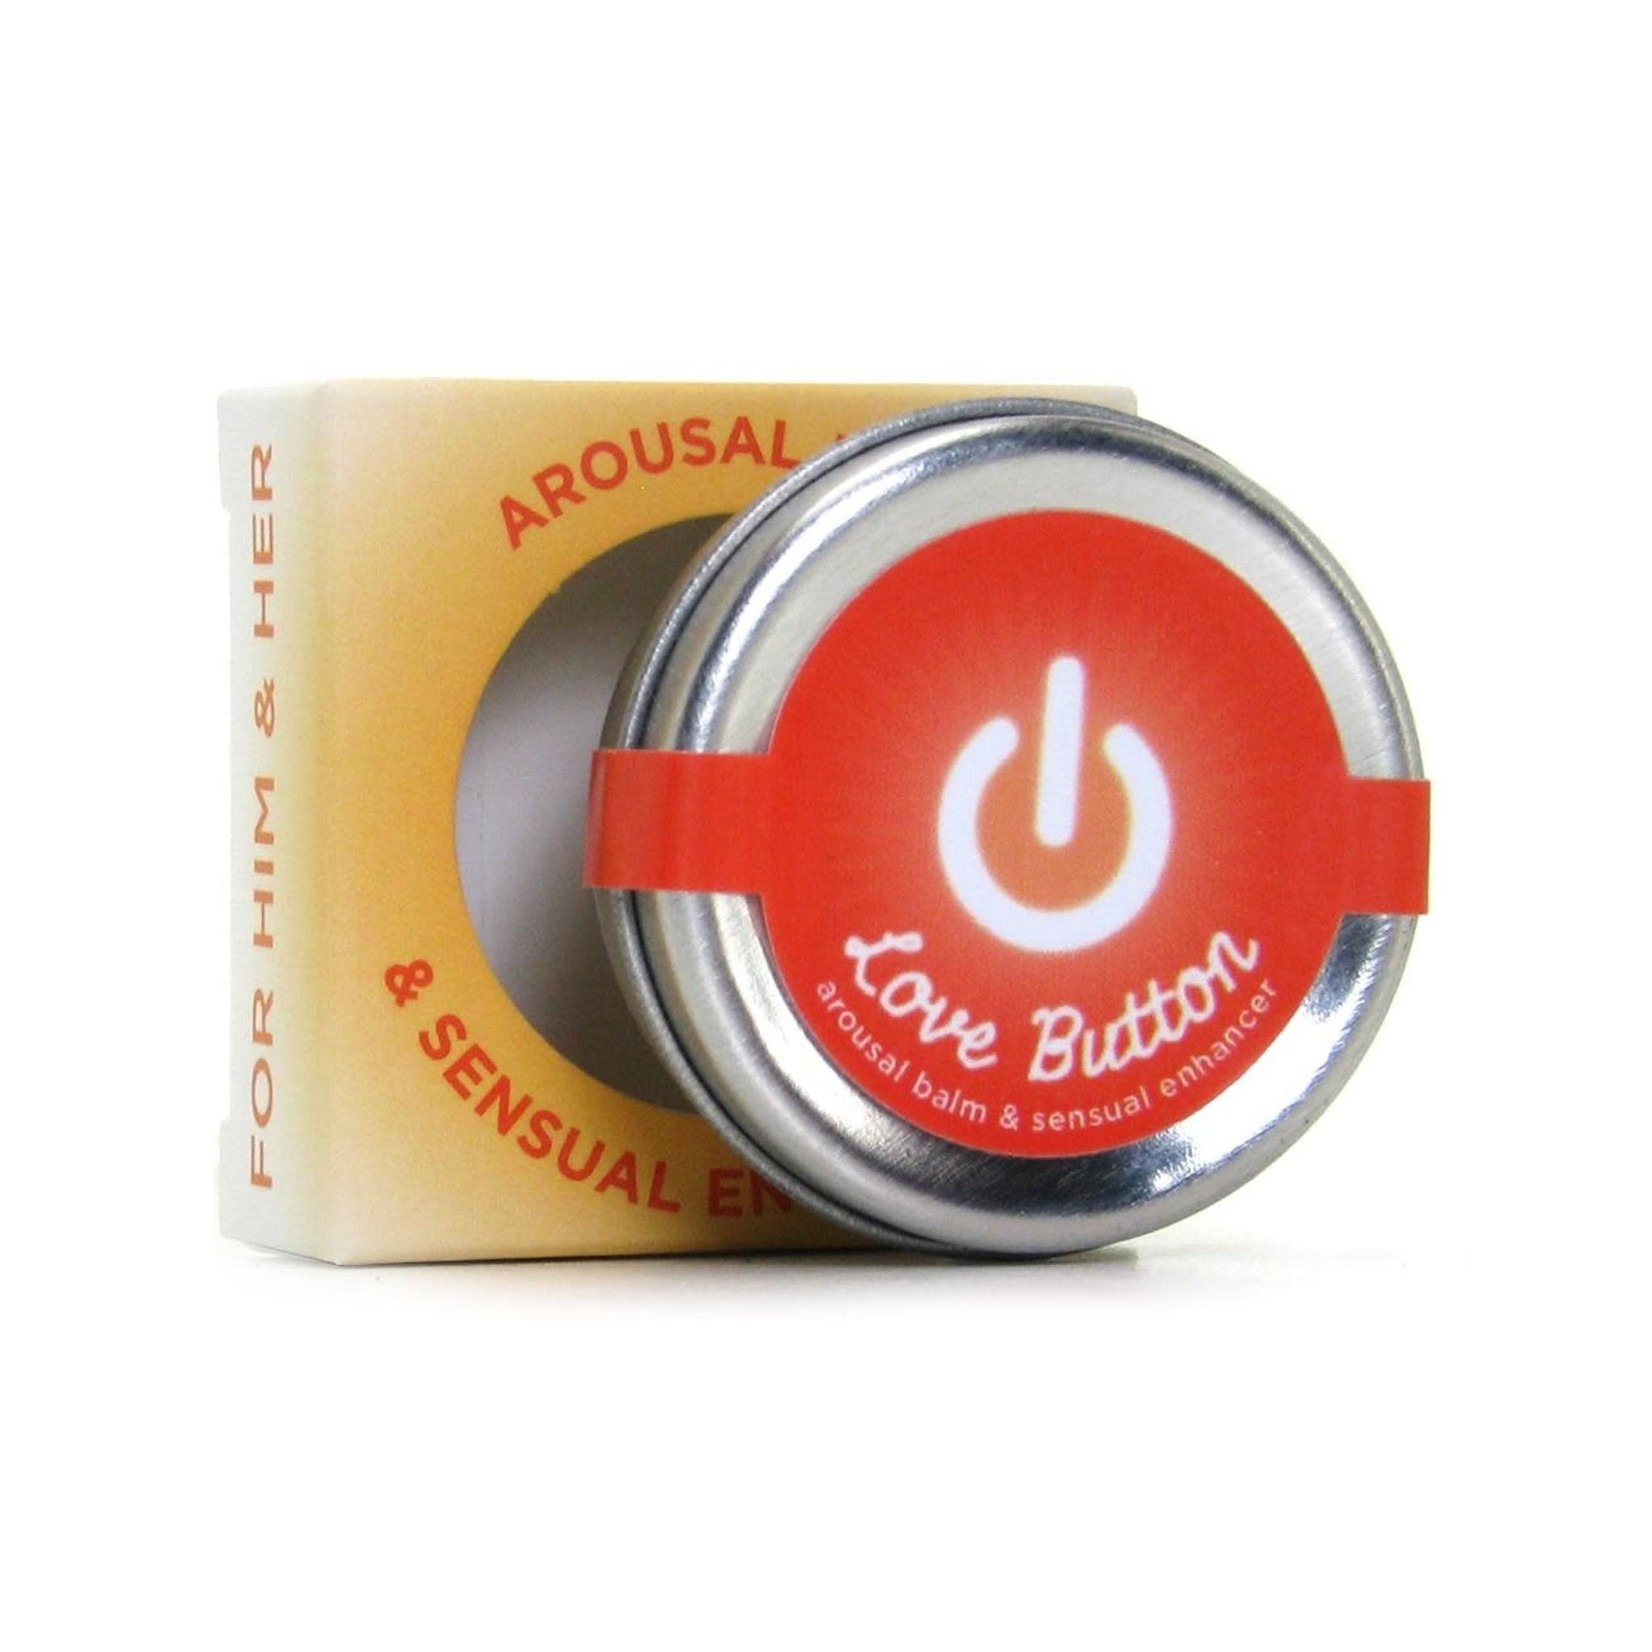 EARTHLY BODY EARTHLY BODY - LOVE BUTTON - AROUSAL BALM FOR HIM / HER